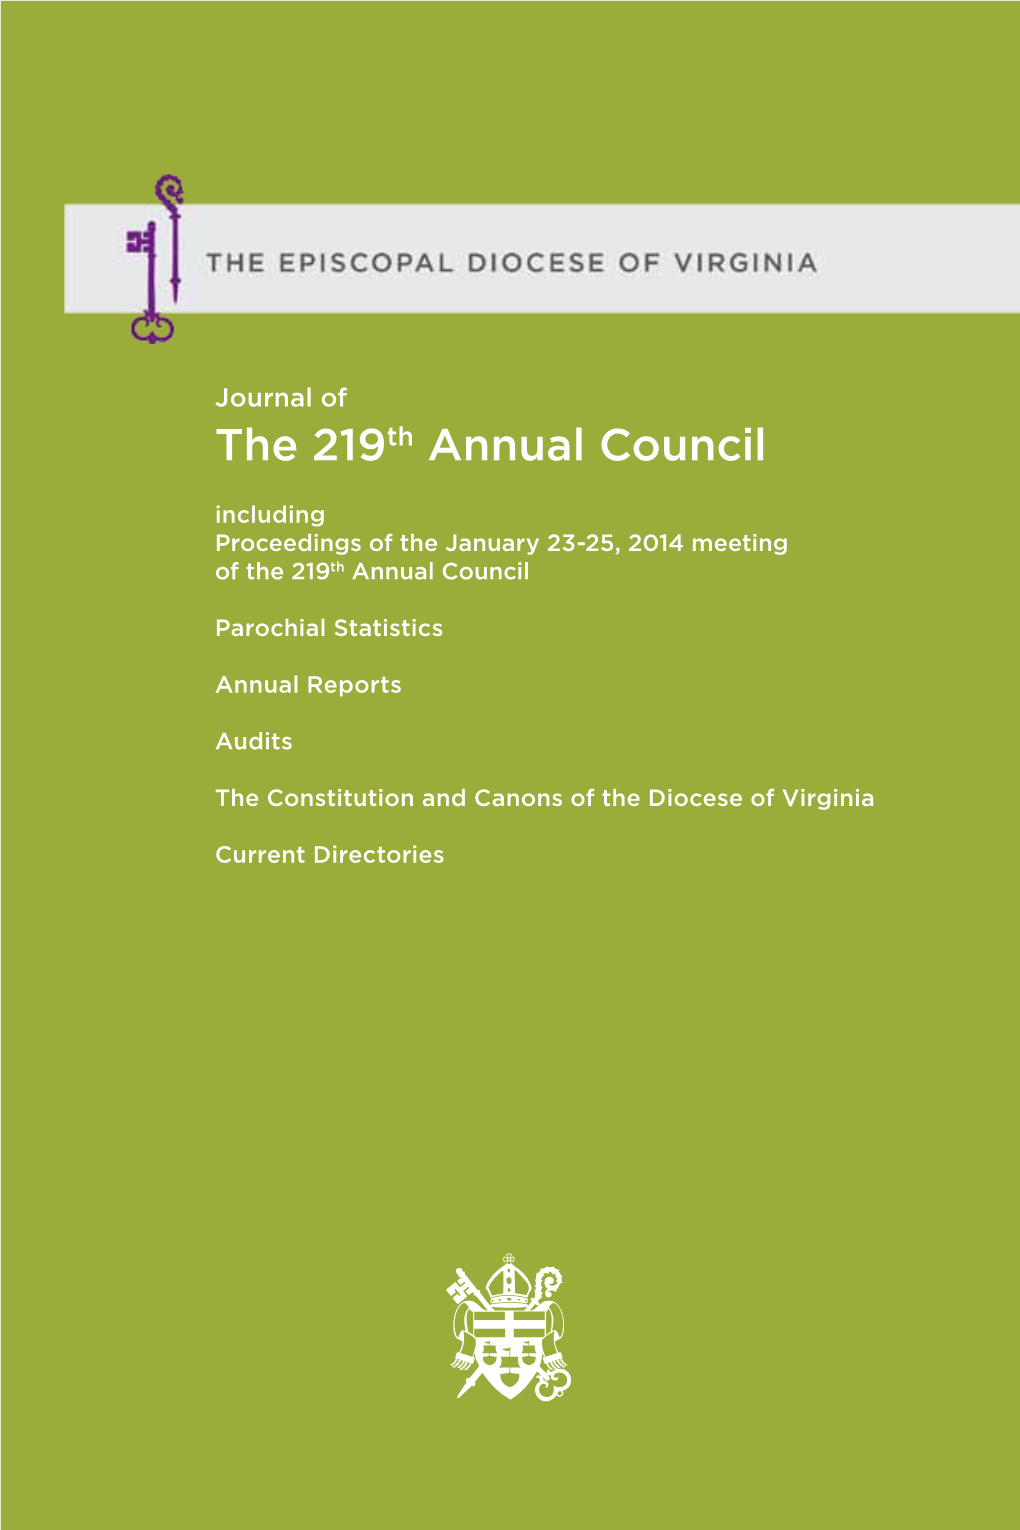 The 219Th Annual Council Including Proceedings of the January 23-25, 2014 Meeting of the 219Th Annual Council